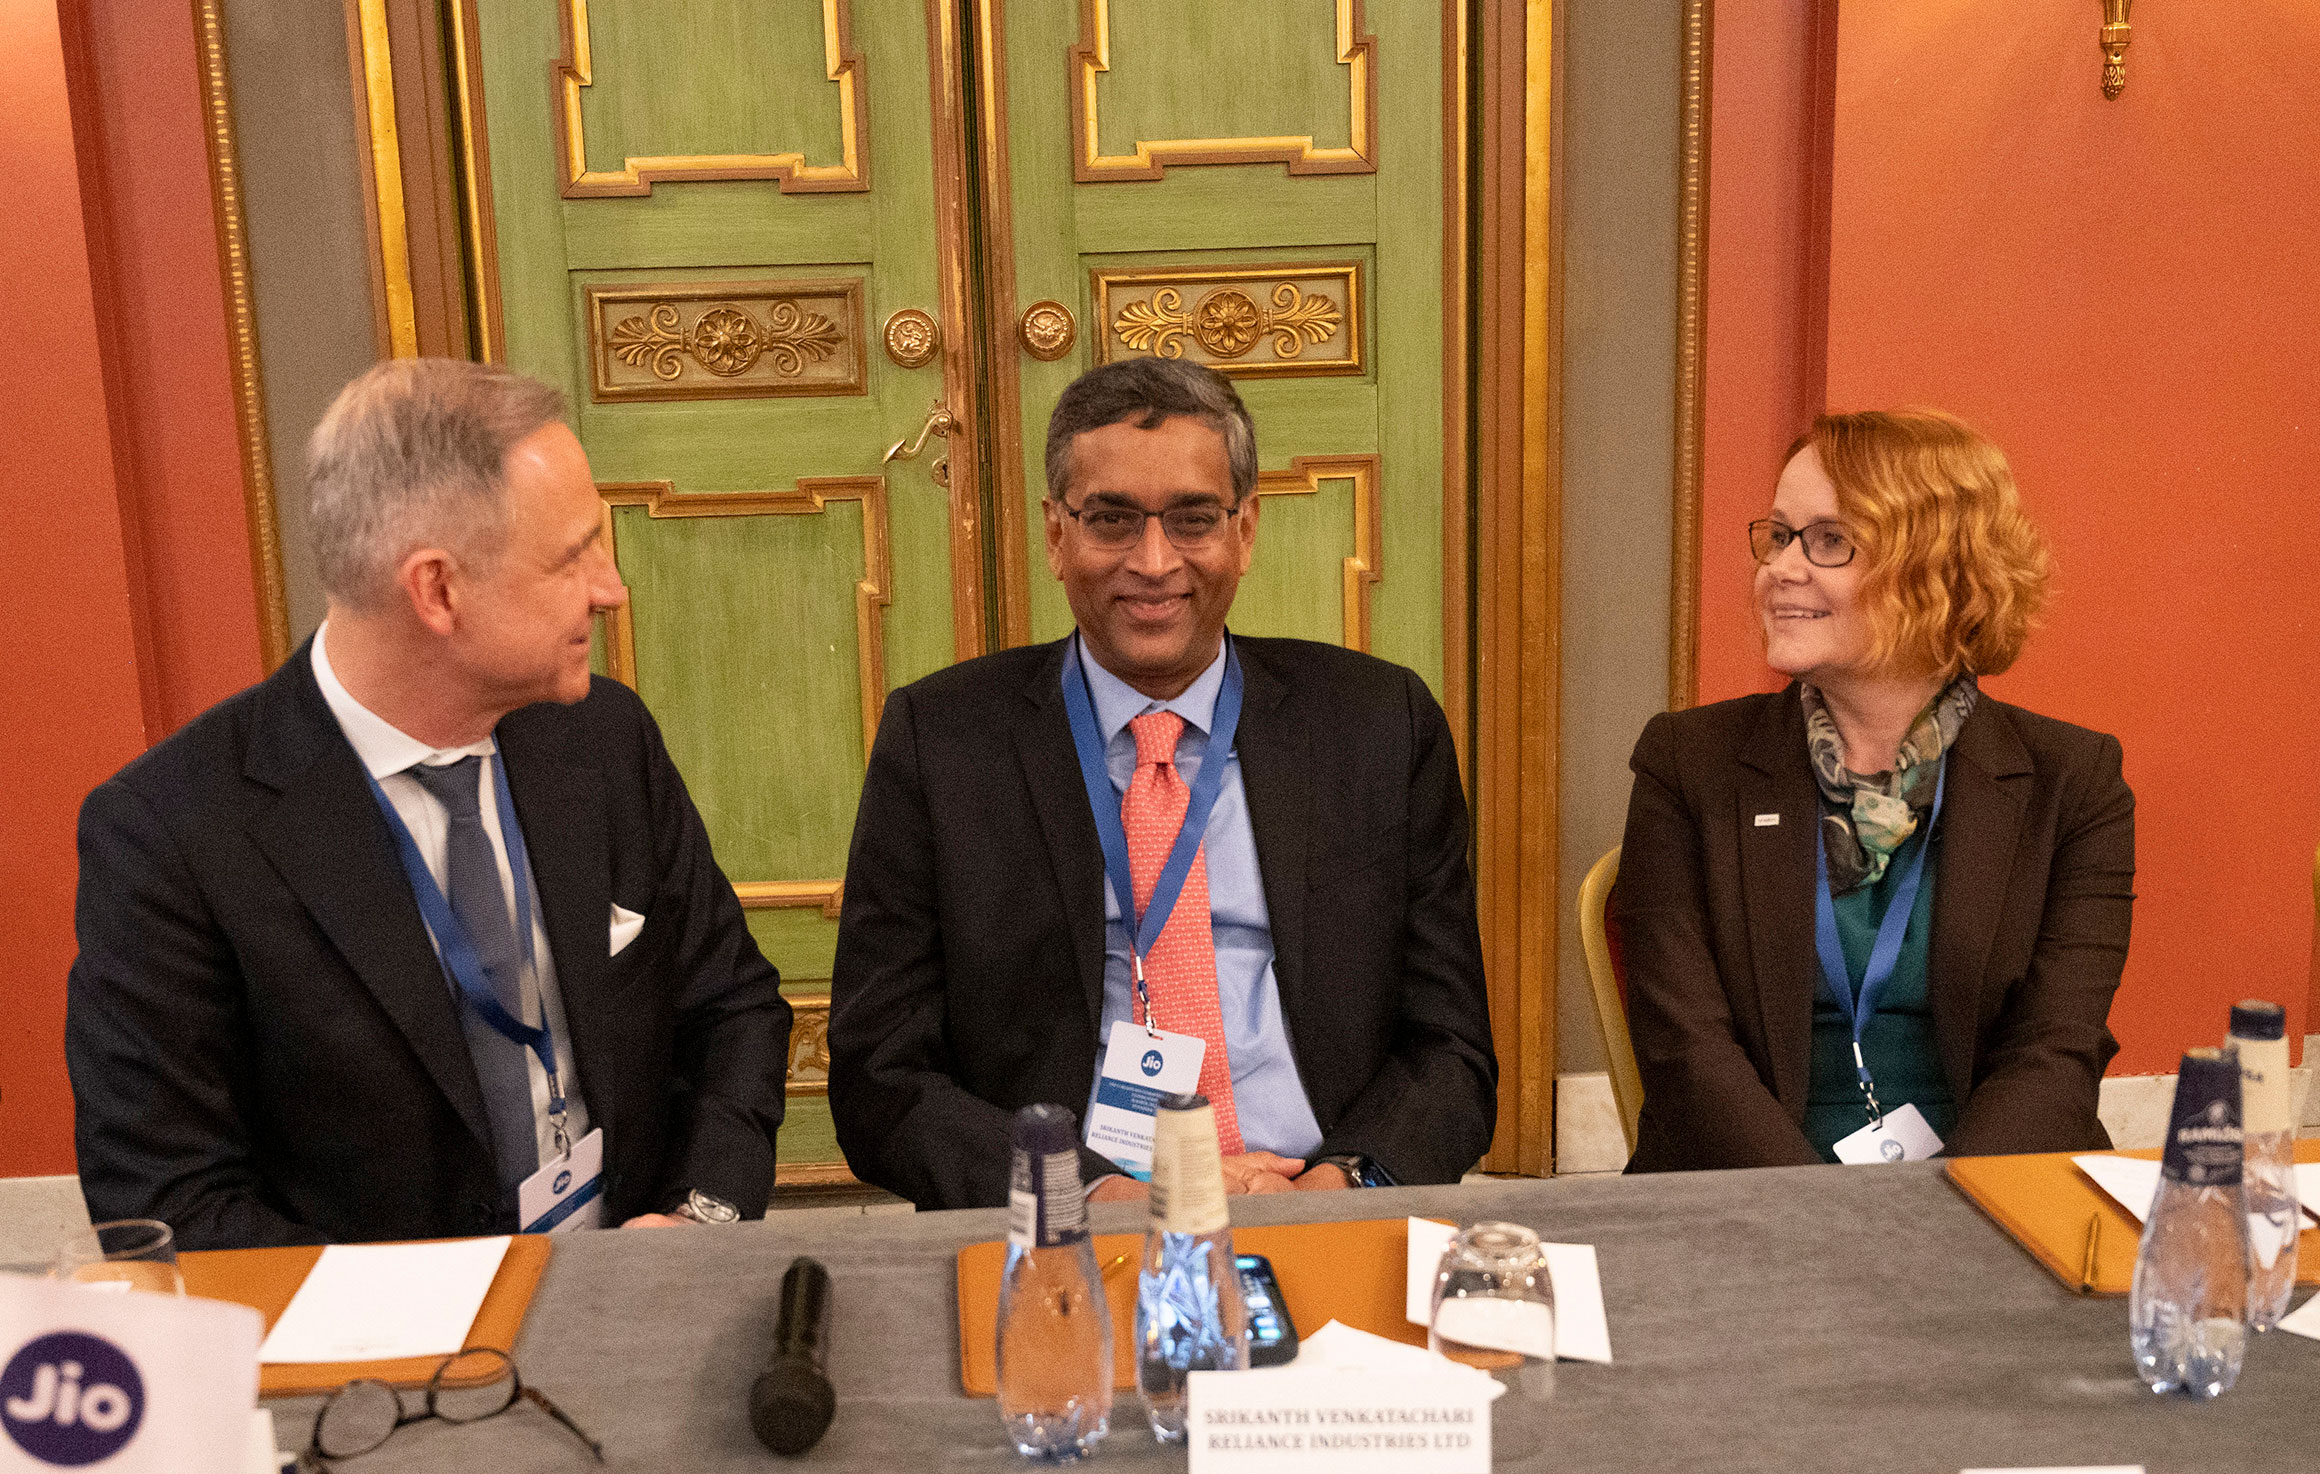 Carl Melander, Ericsson; Srikanth Venkatachari, Reliance Industries Limited, and Anna-Karin Jatko, EKN during the signing ceremony of the Reliance Jio 5G deal in Stockholm.